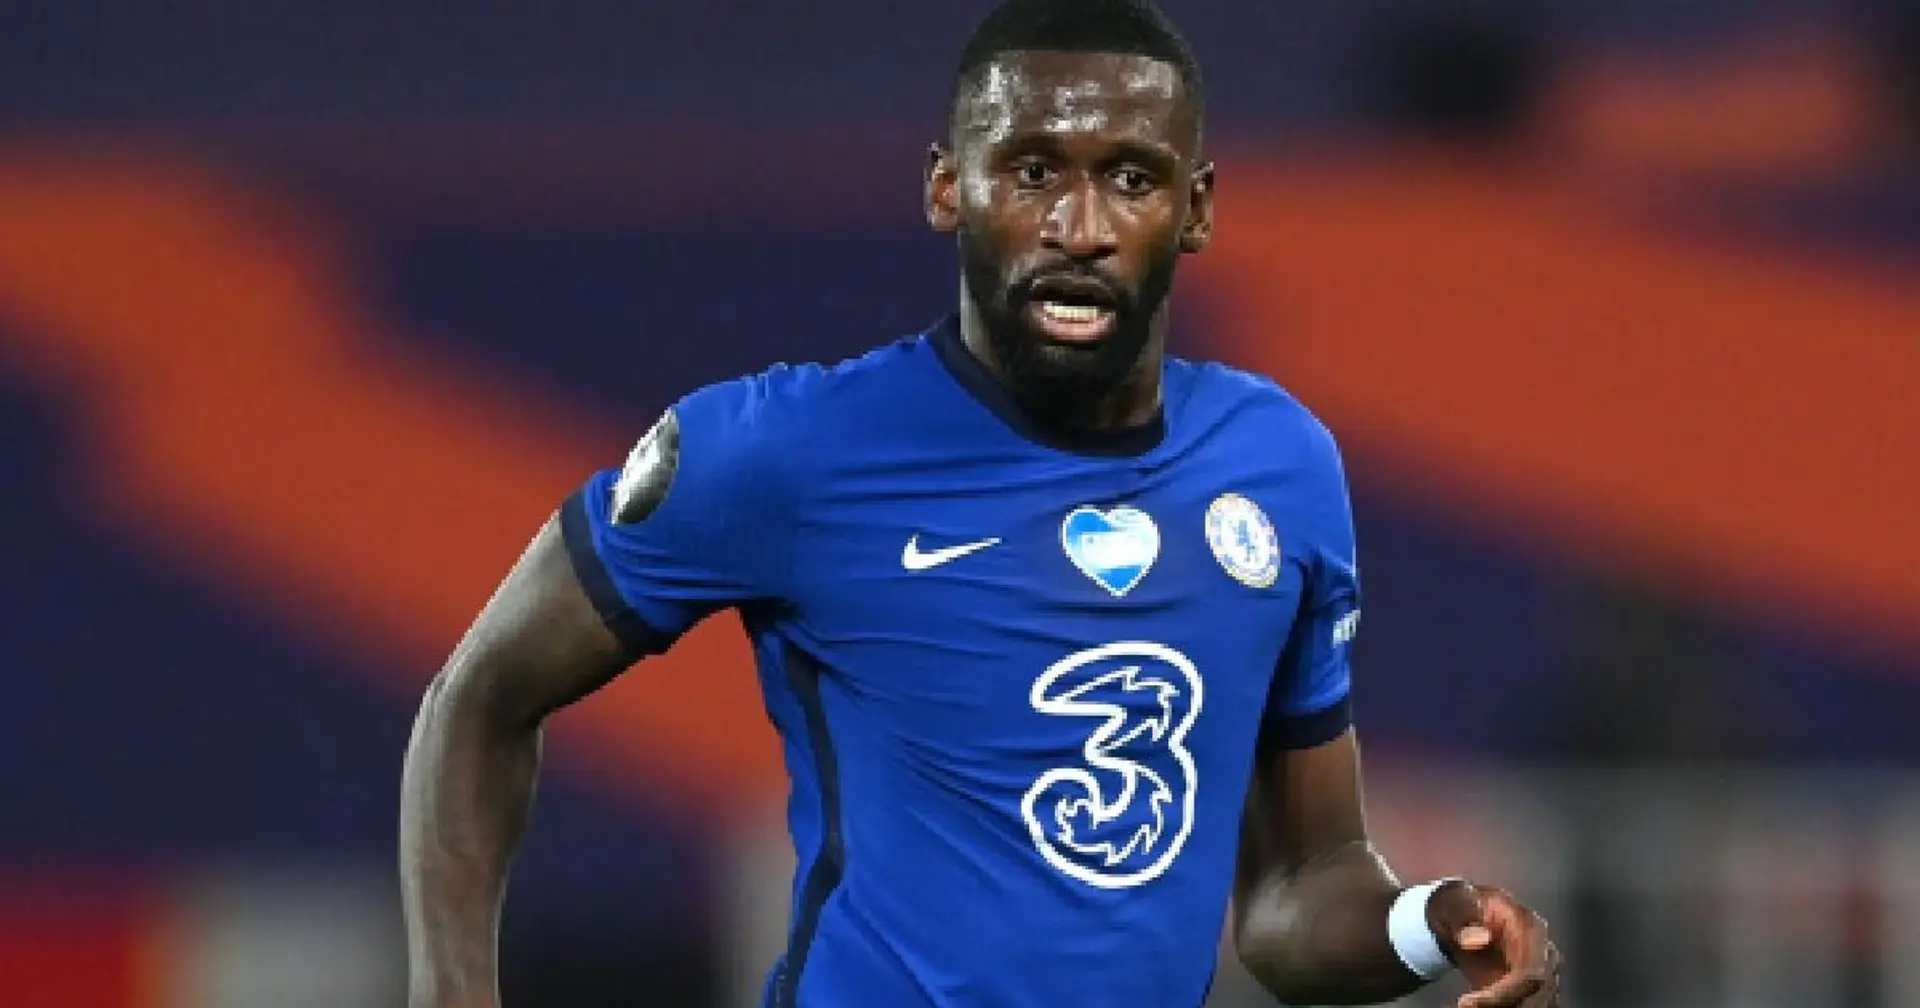 Antonio Rudiger explains how he started his career playing winger before switching to defence